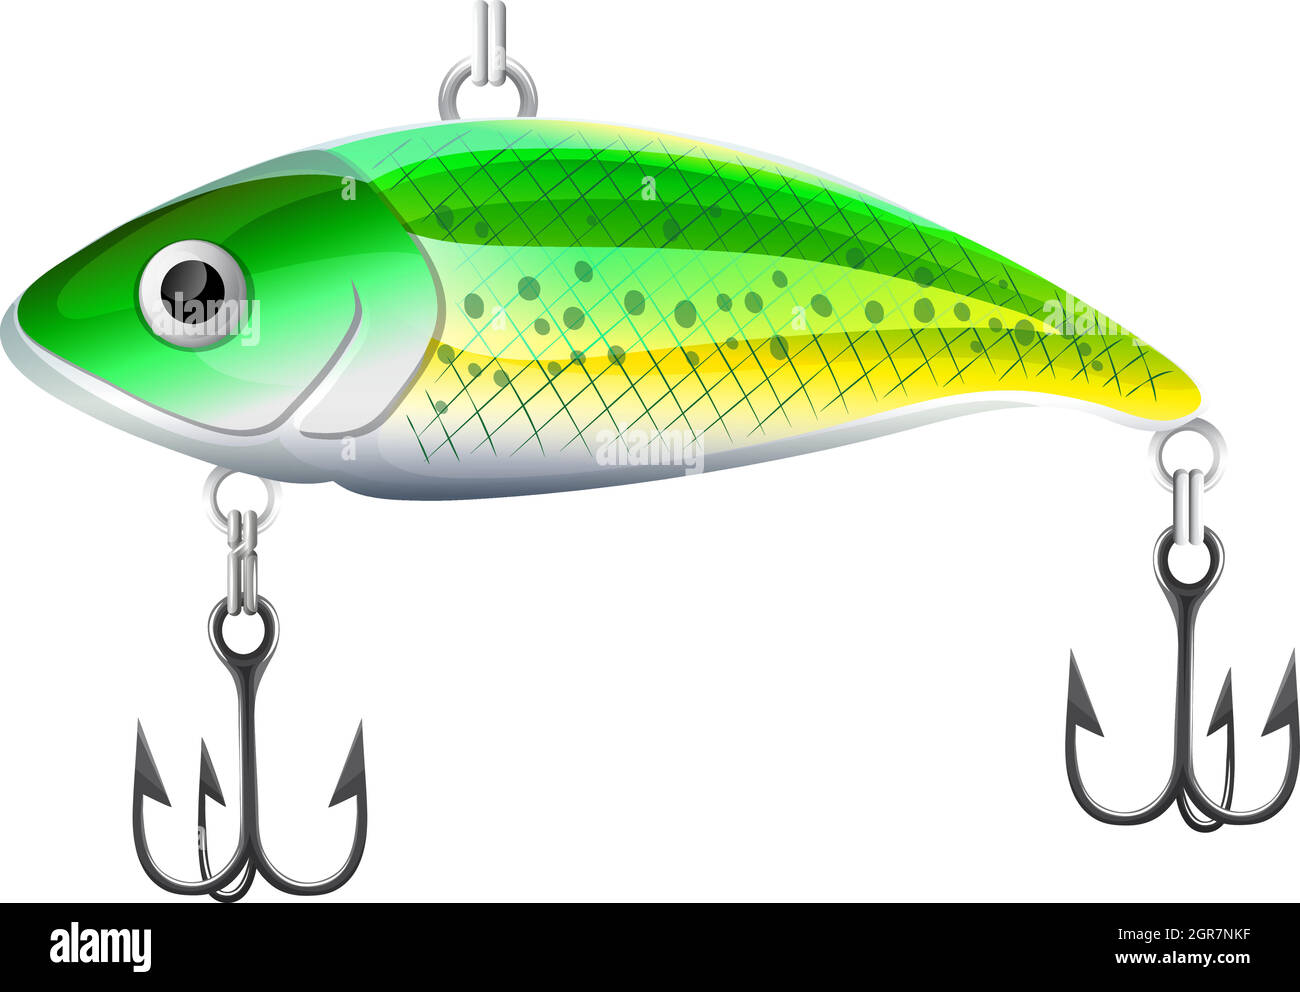 Green fishing lure Stock Vector Images - Alamy